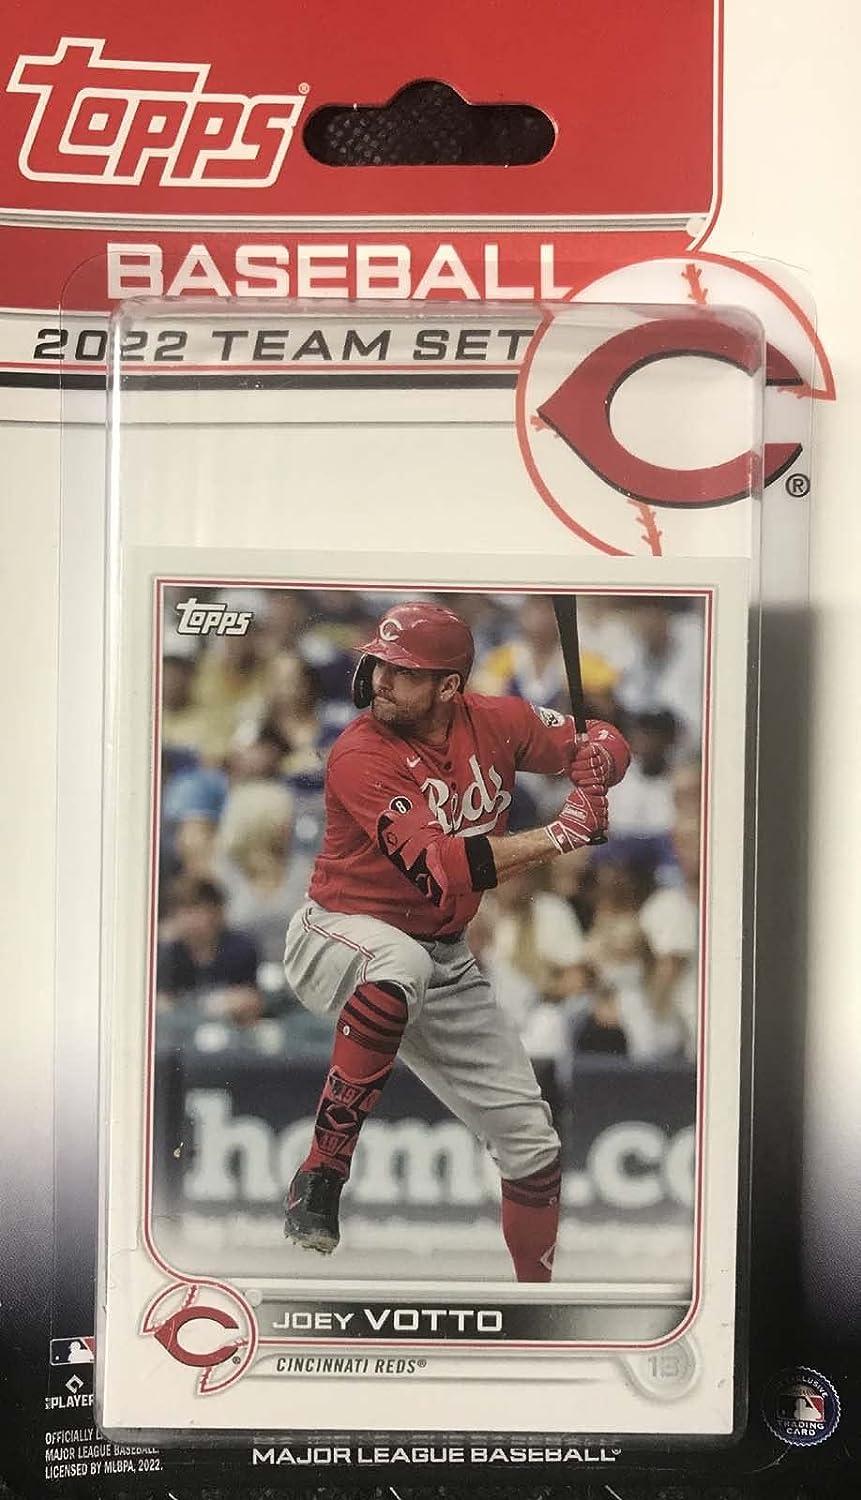 Cincinnati Reds: Jonathan India 2022 Poster - Officially Licensed